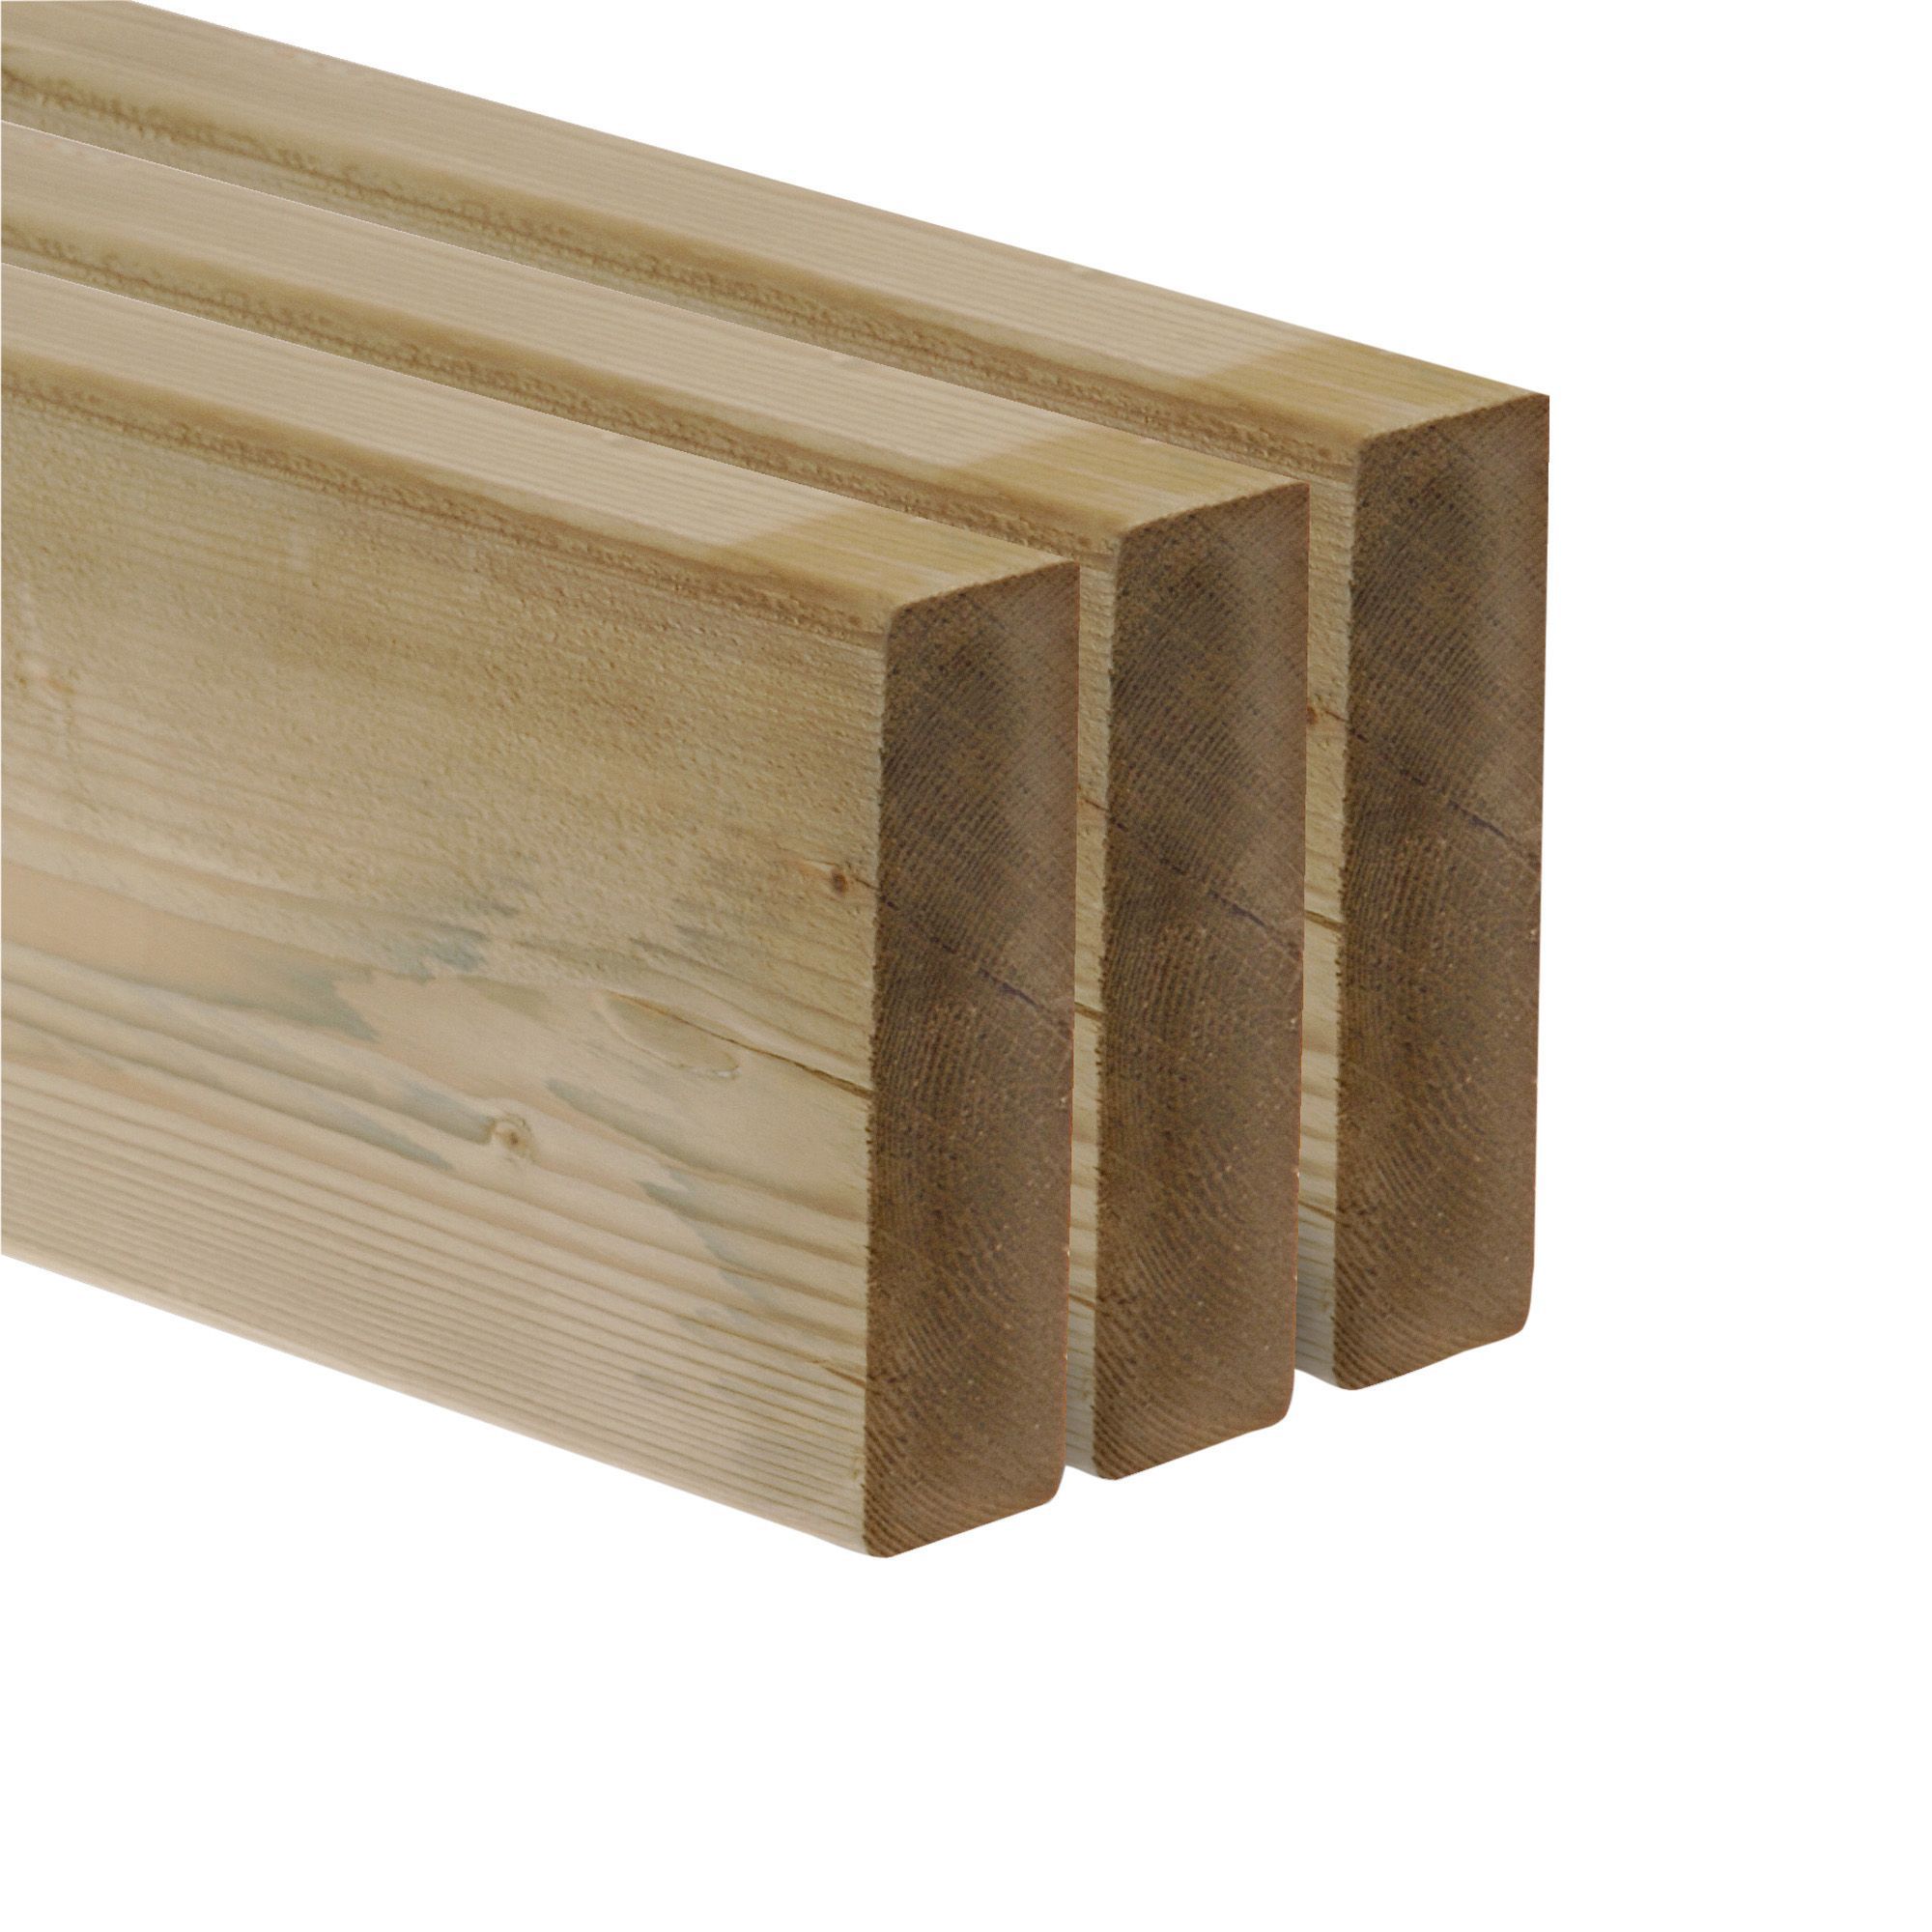 Metsä Wood Structural Decking Softwood Deck Joist (L)2.4M (W)144mm (T)44mm Pack Of 3